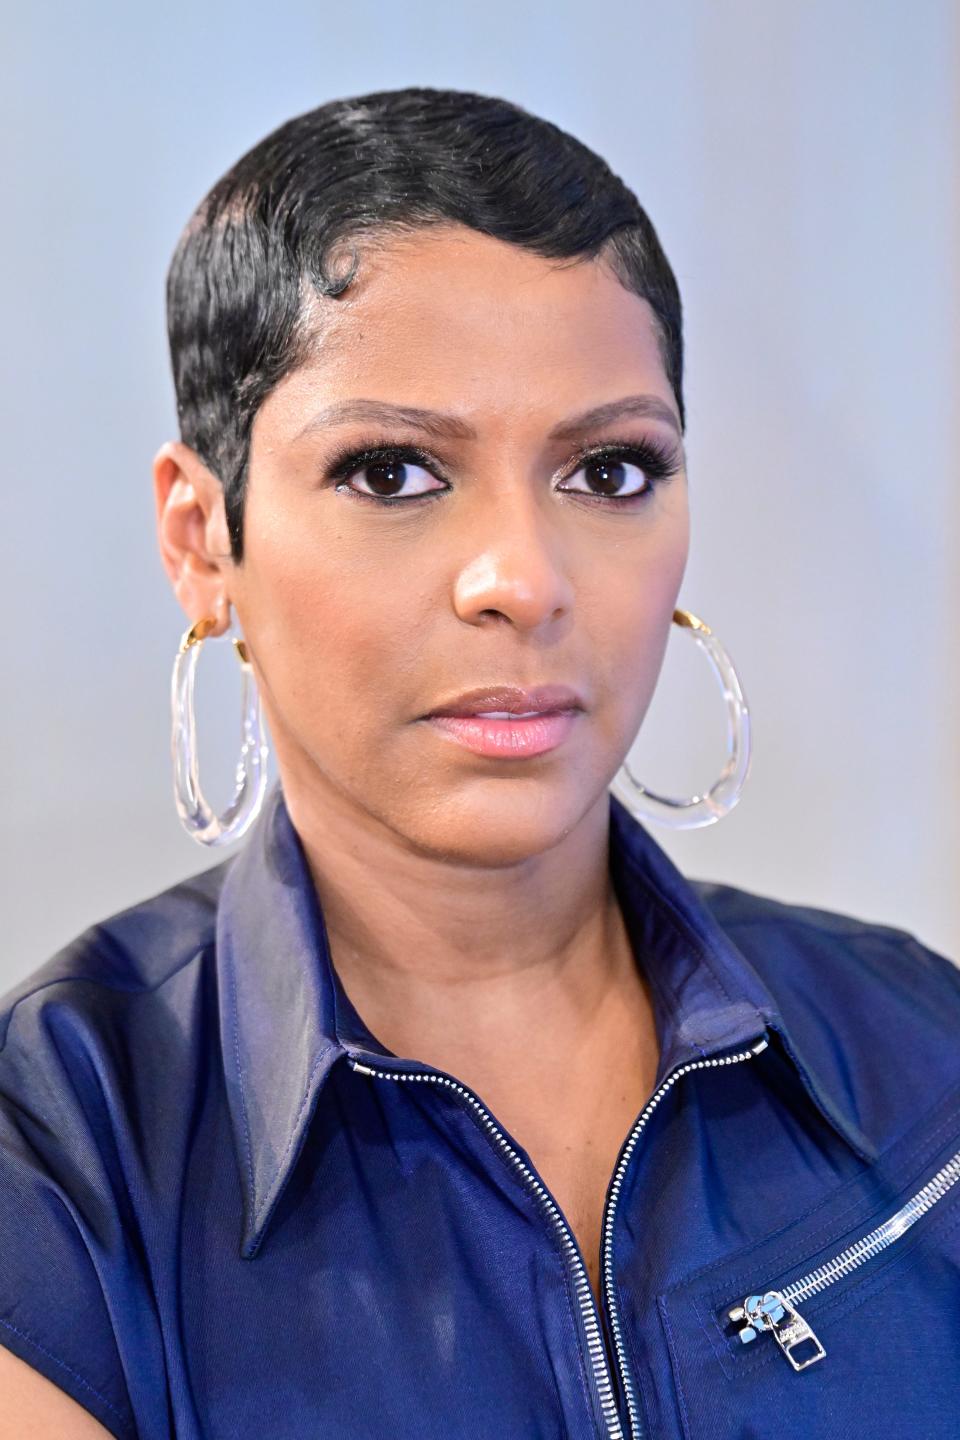 Talk show host and author Tamron Hall